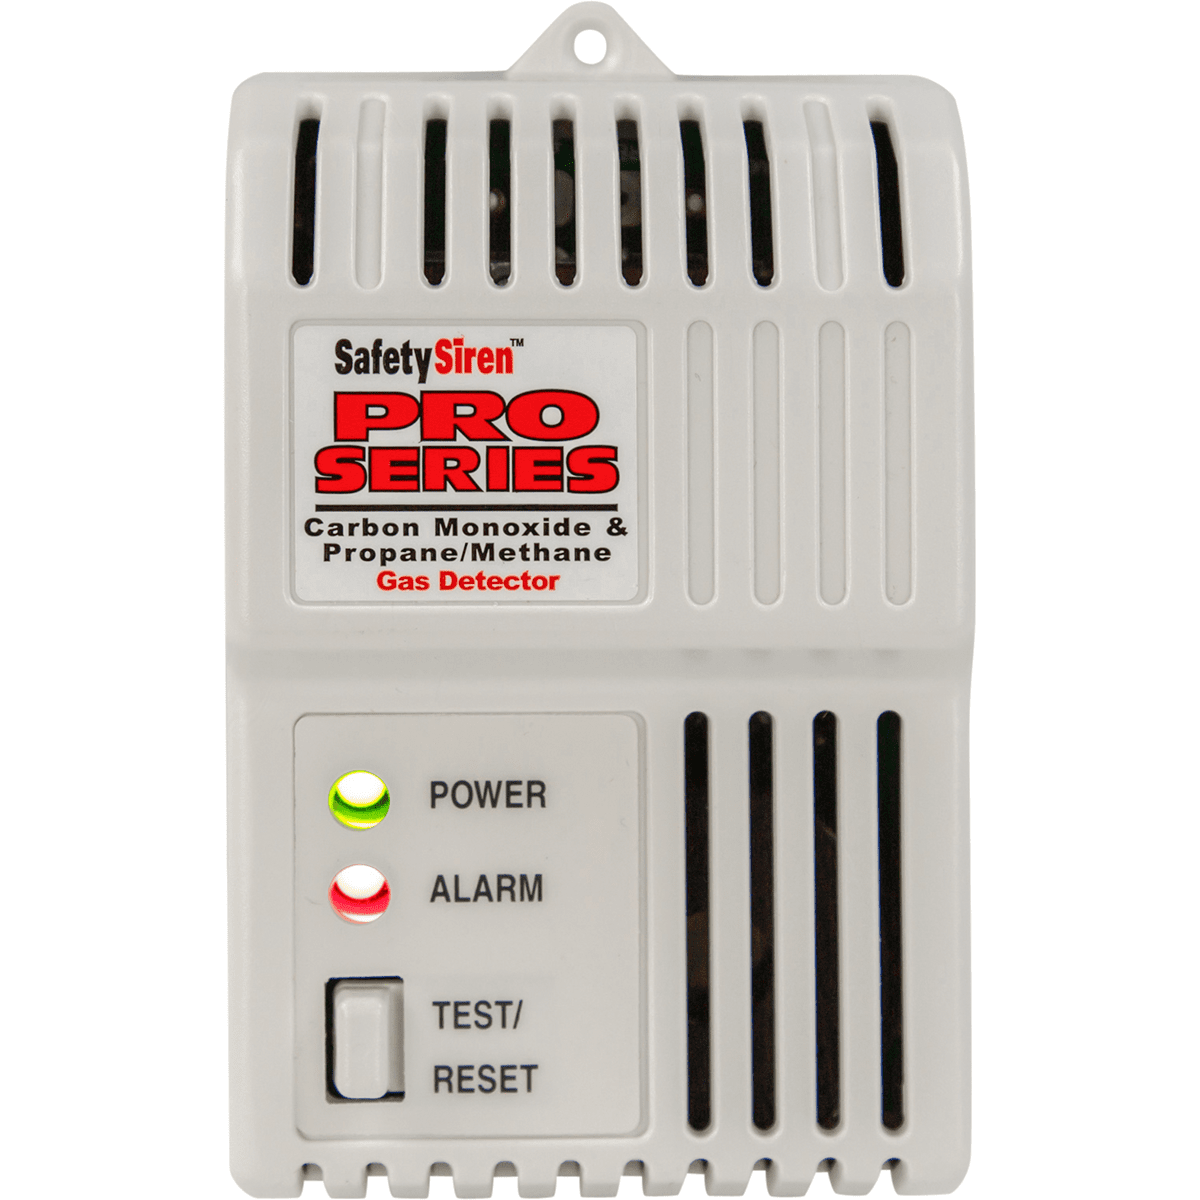 Safety Siren Pro Series Combination Gas Detector